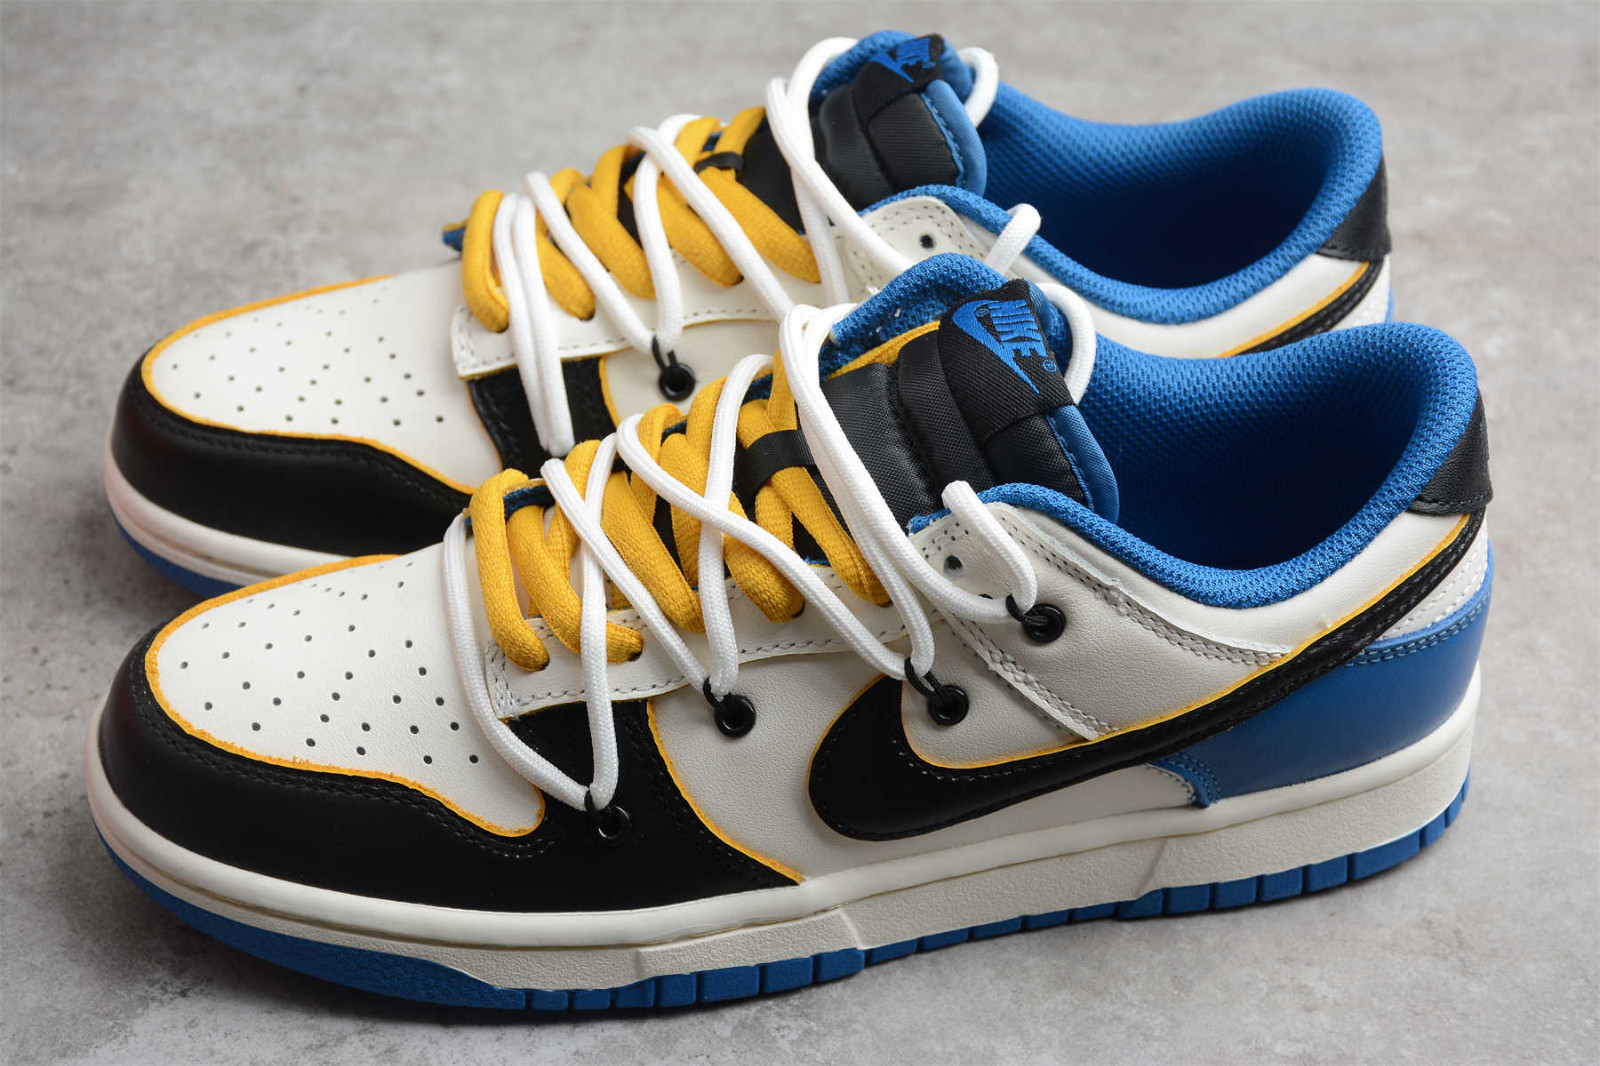 nike roshe with design and gold background images - 108 - Nike SB